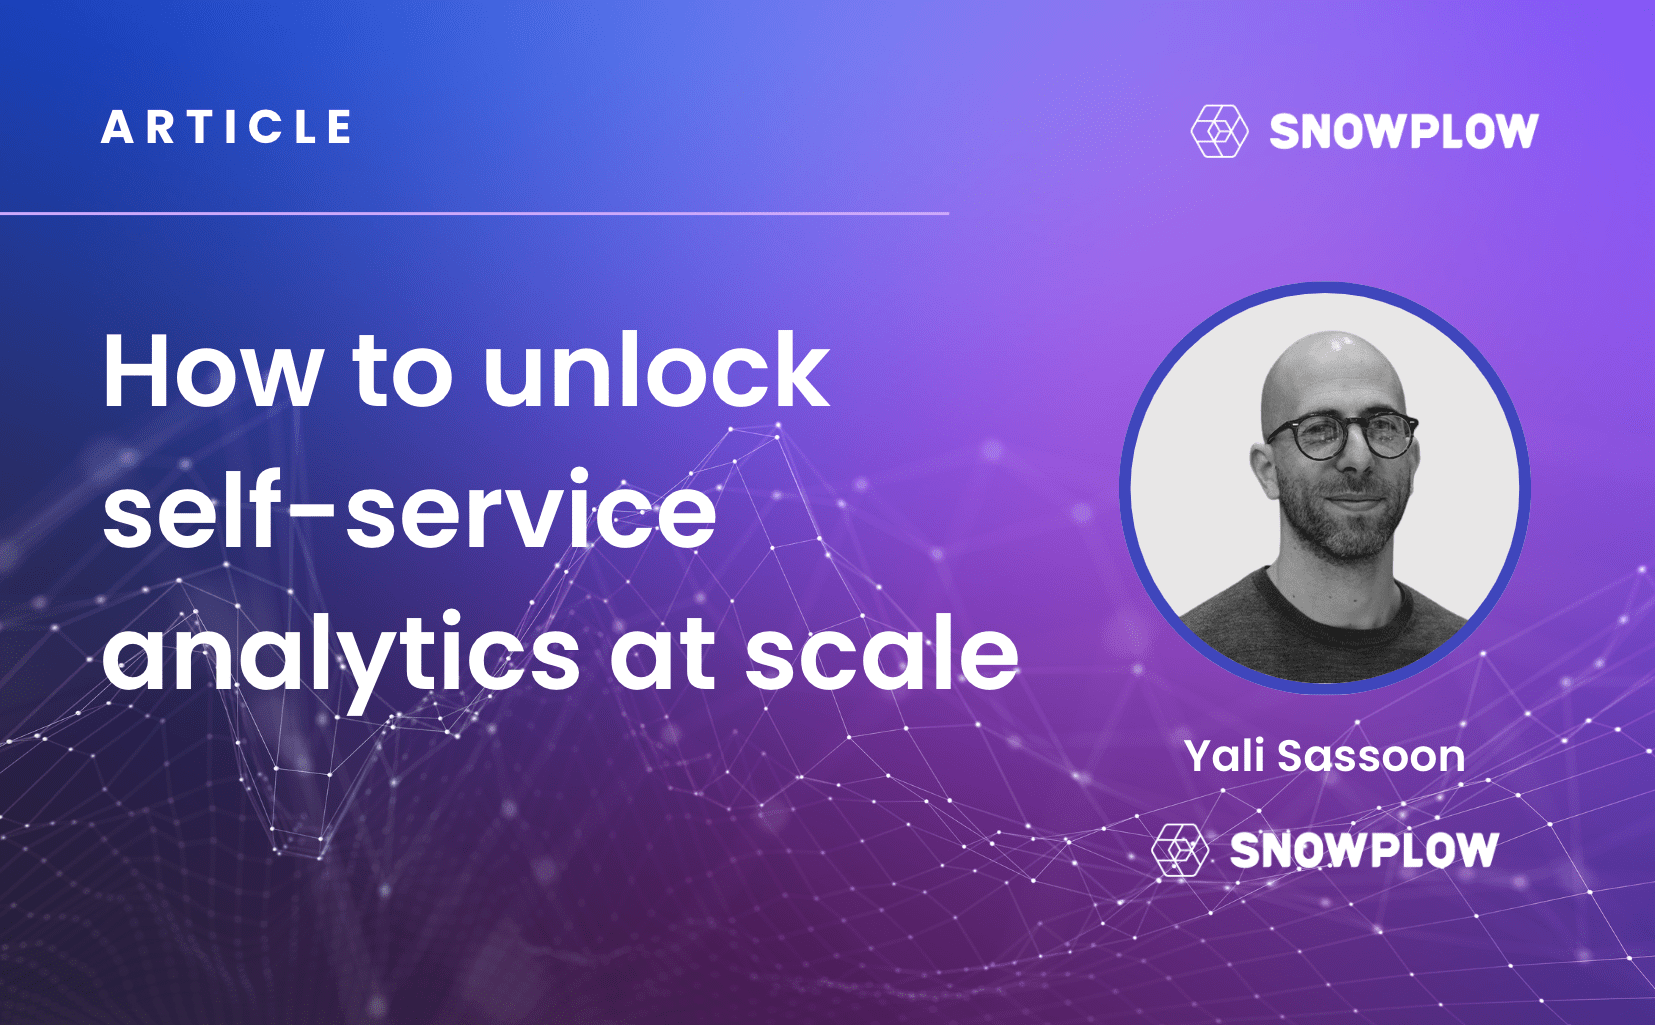 How to unlock self-service analytics at scale